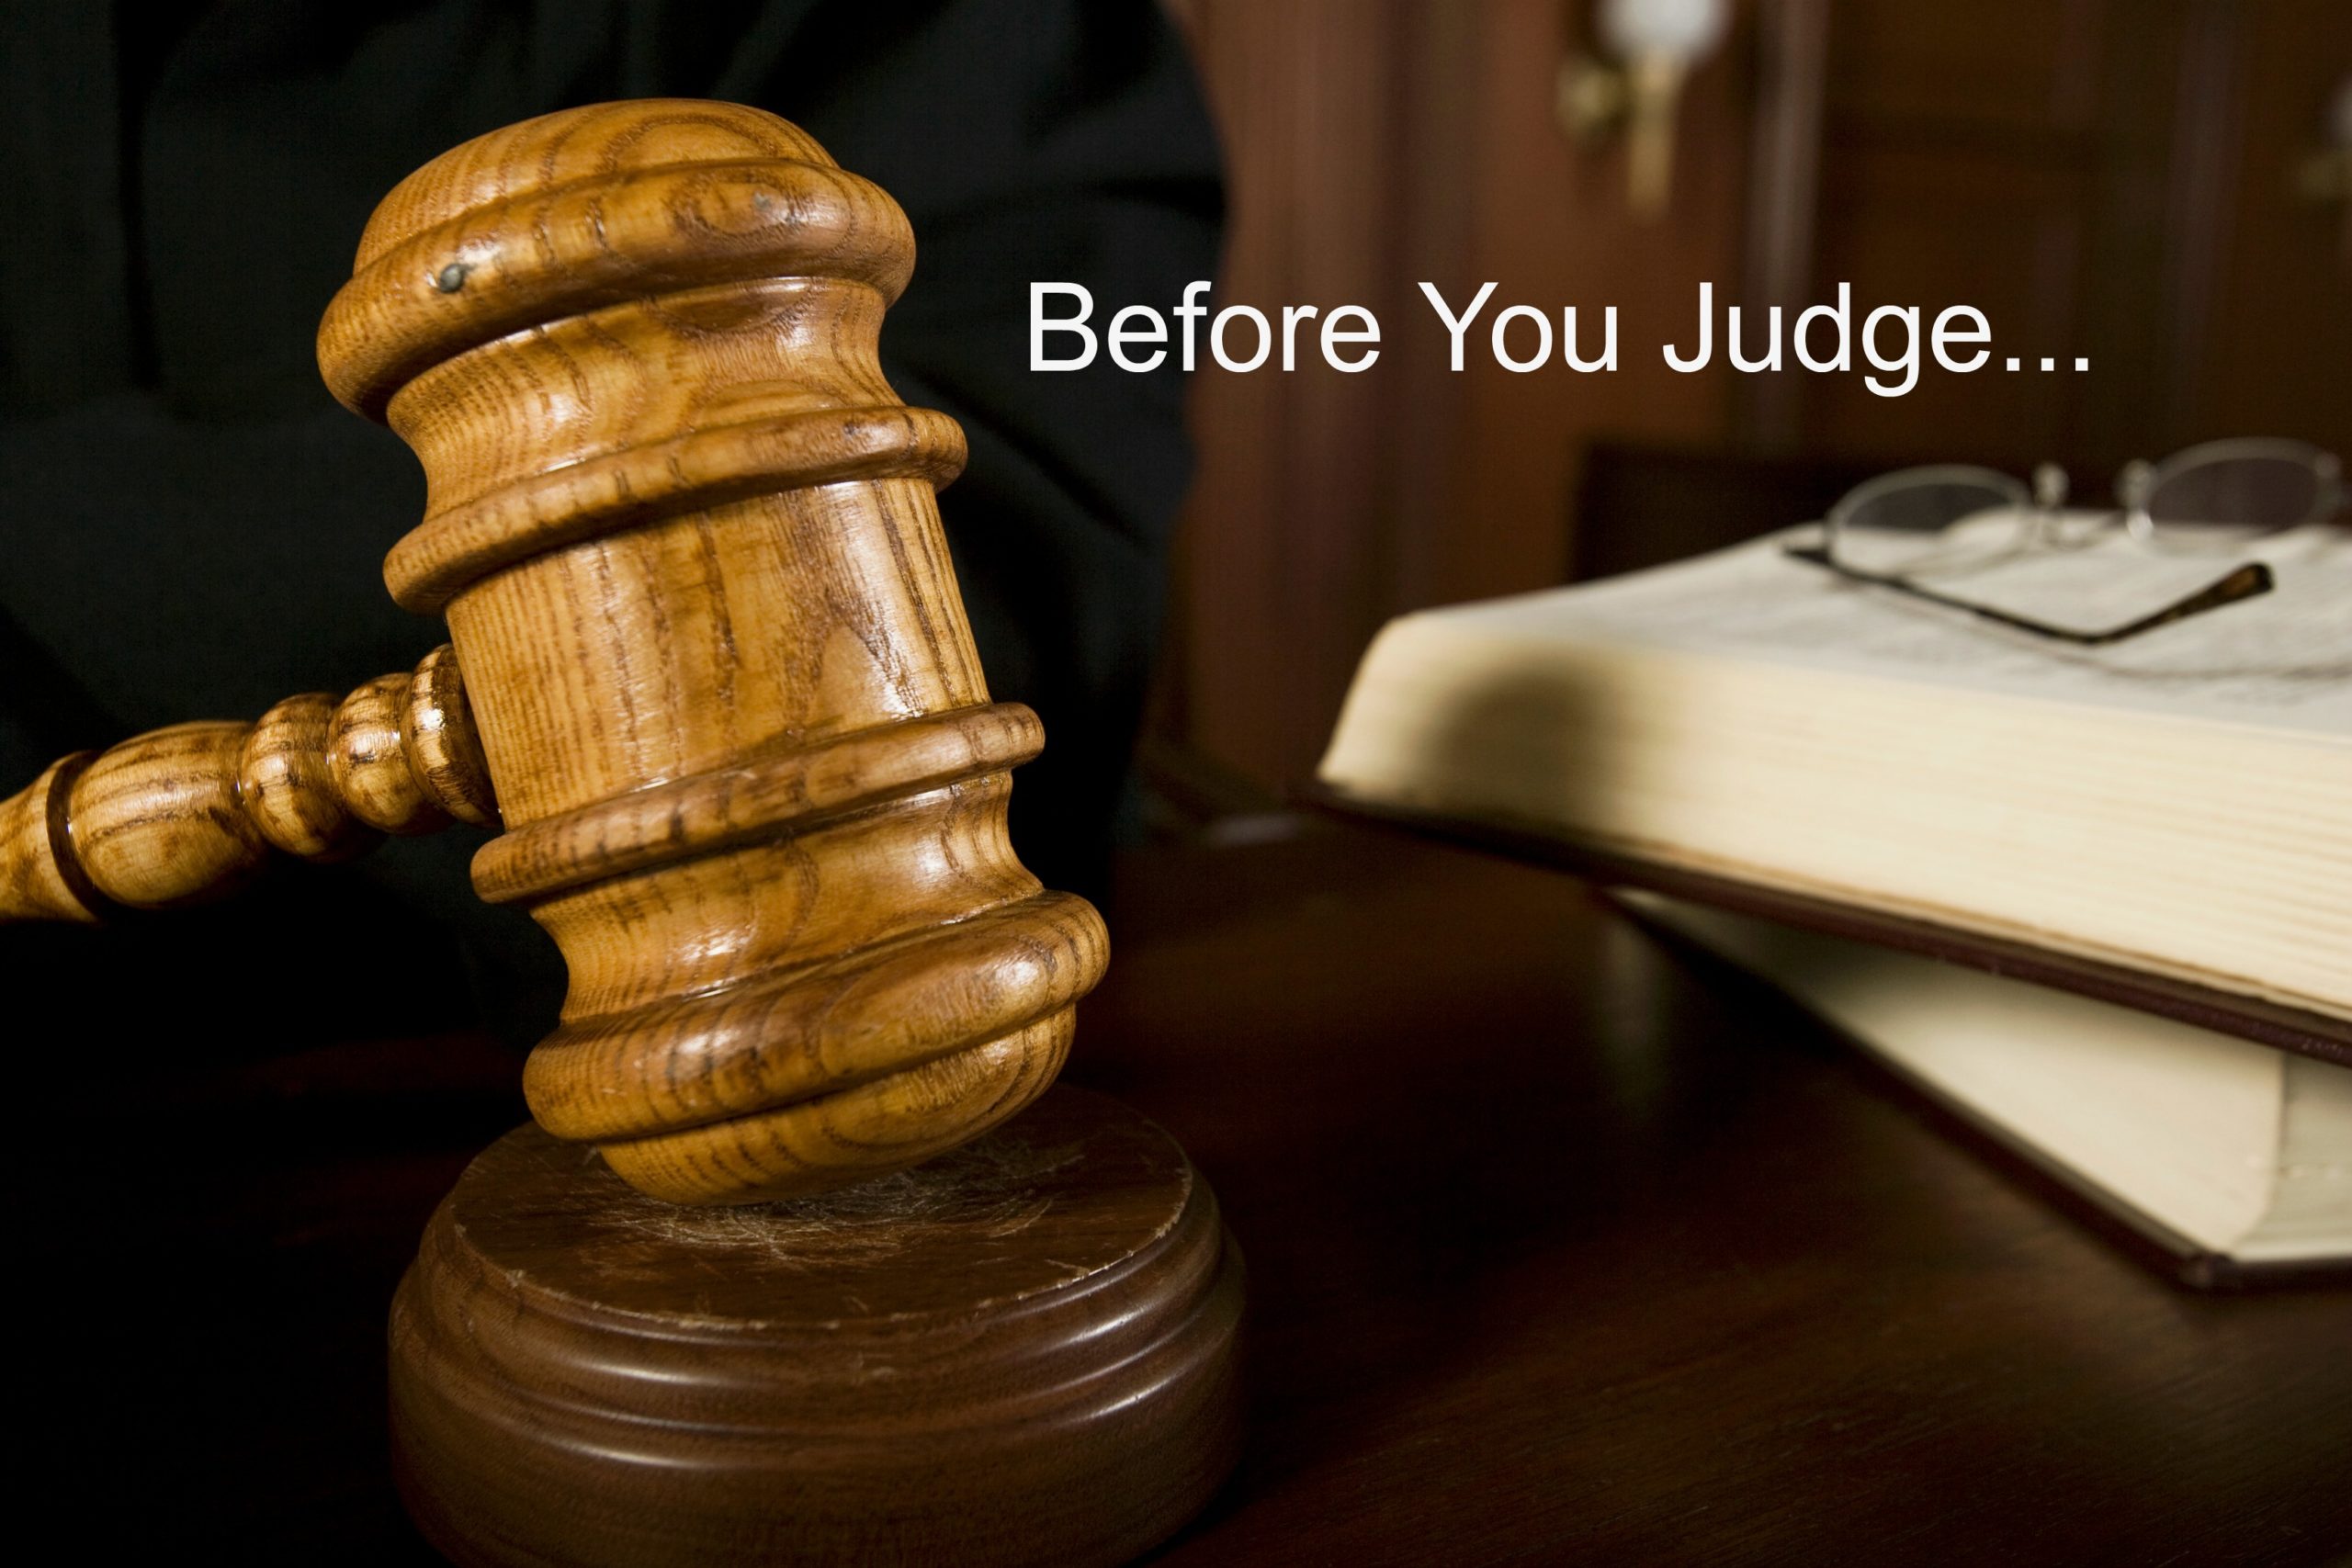 Before You Judge